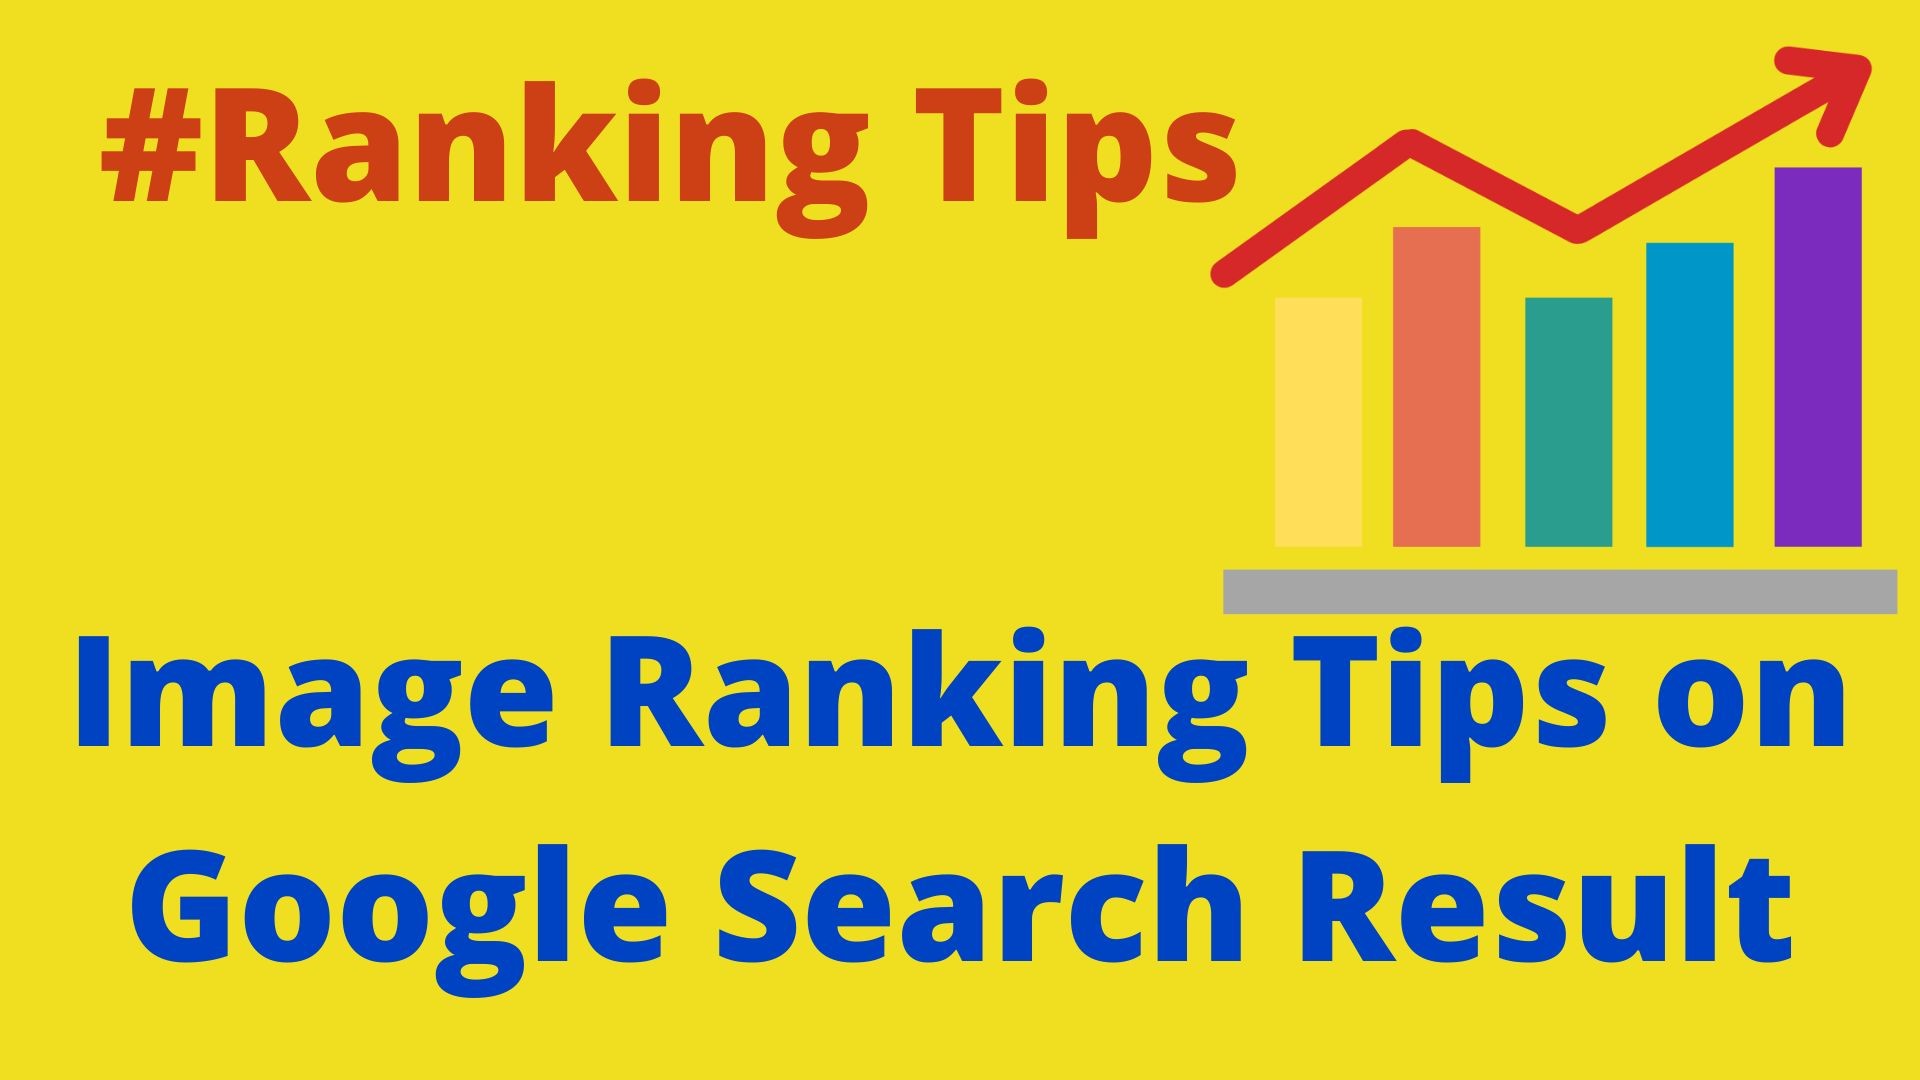 Image Ranking Tips on Google Search Result